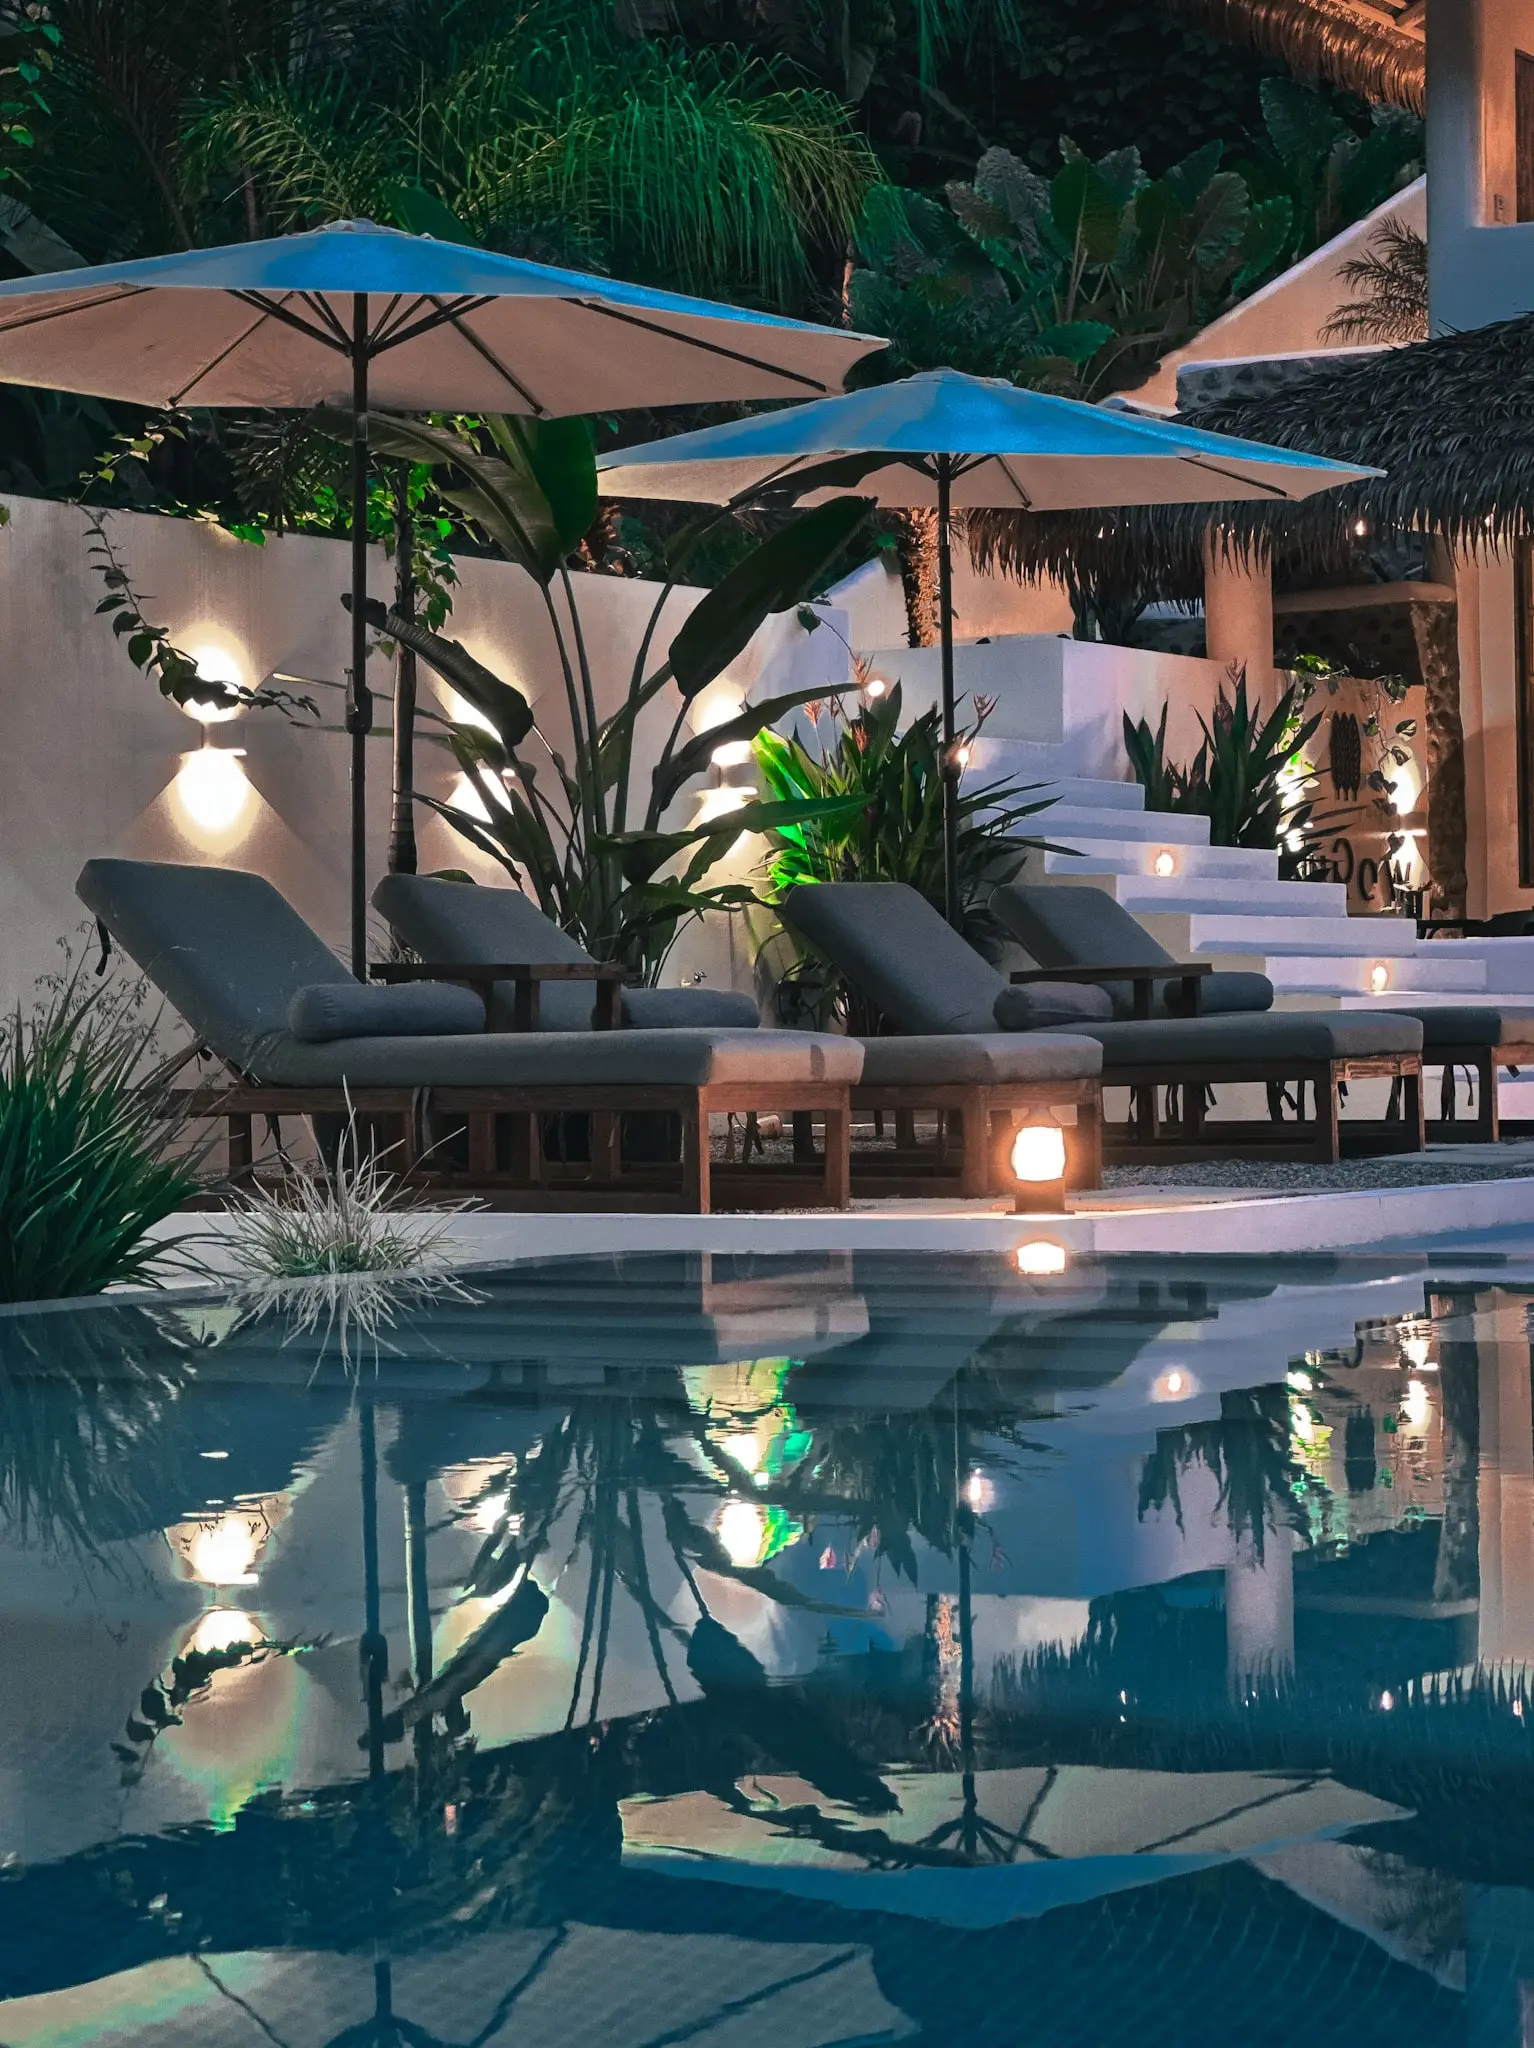 A serene night view of the pool area at Vayu Retreat Villas, with illuminated lounge chairs and umbrellas reflected in the water. This inviting scene captures the luxurious ambiance of one of the best hotels in Uvita, Costa Rica, perfect for a tranquil and elegant jungle retreat experience.